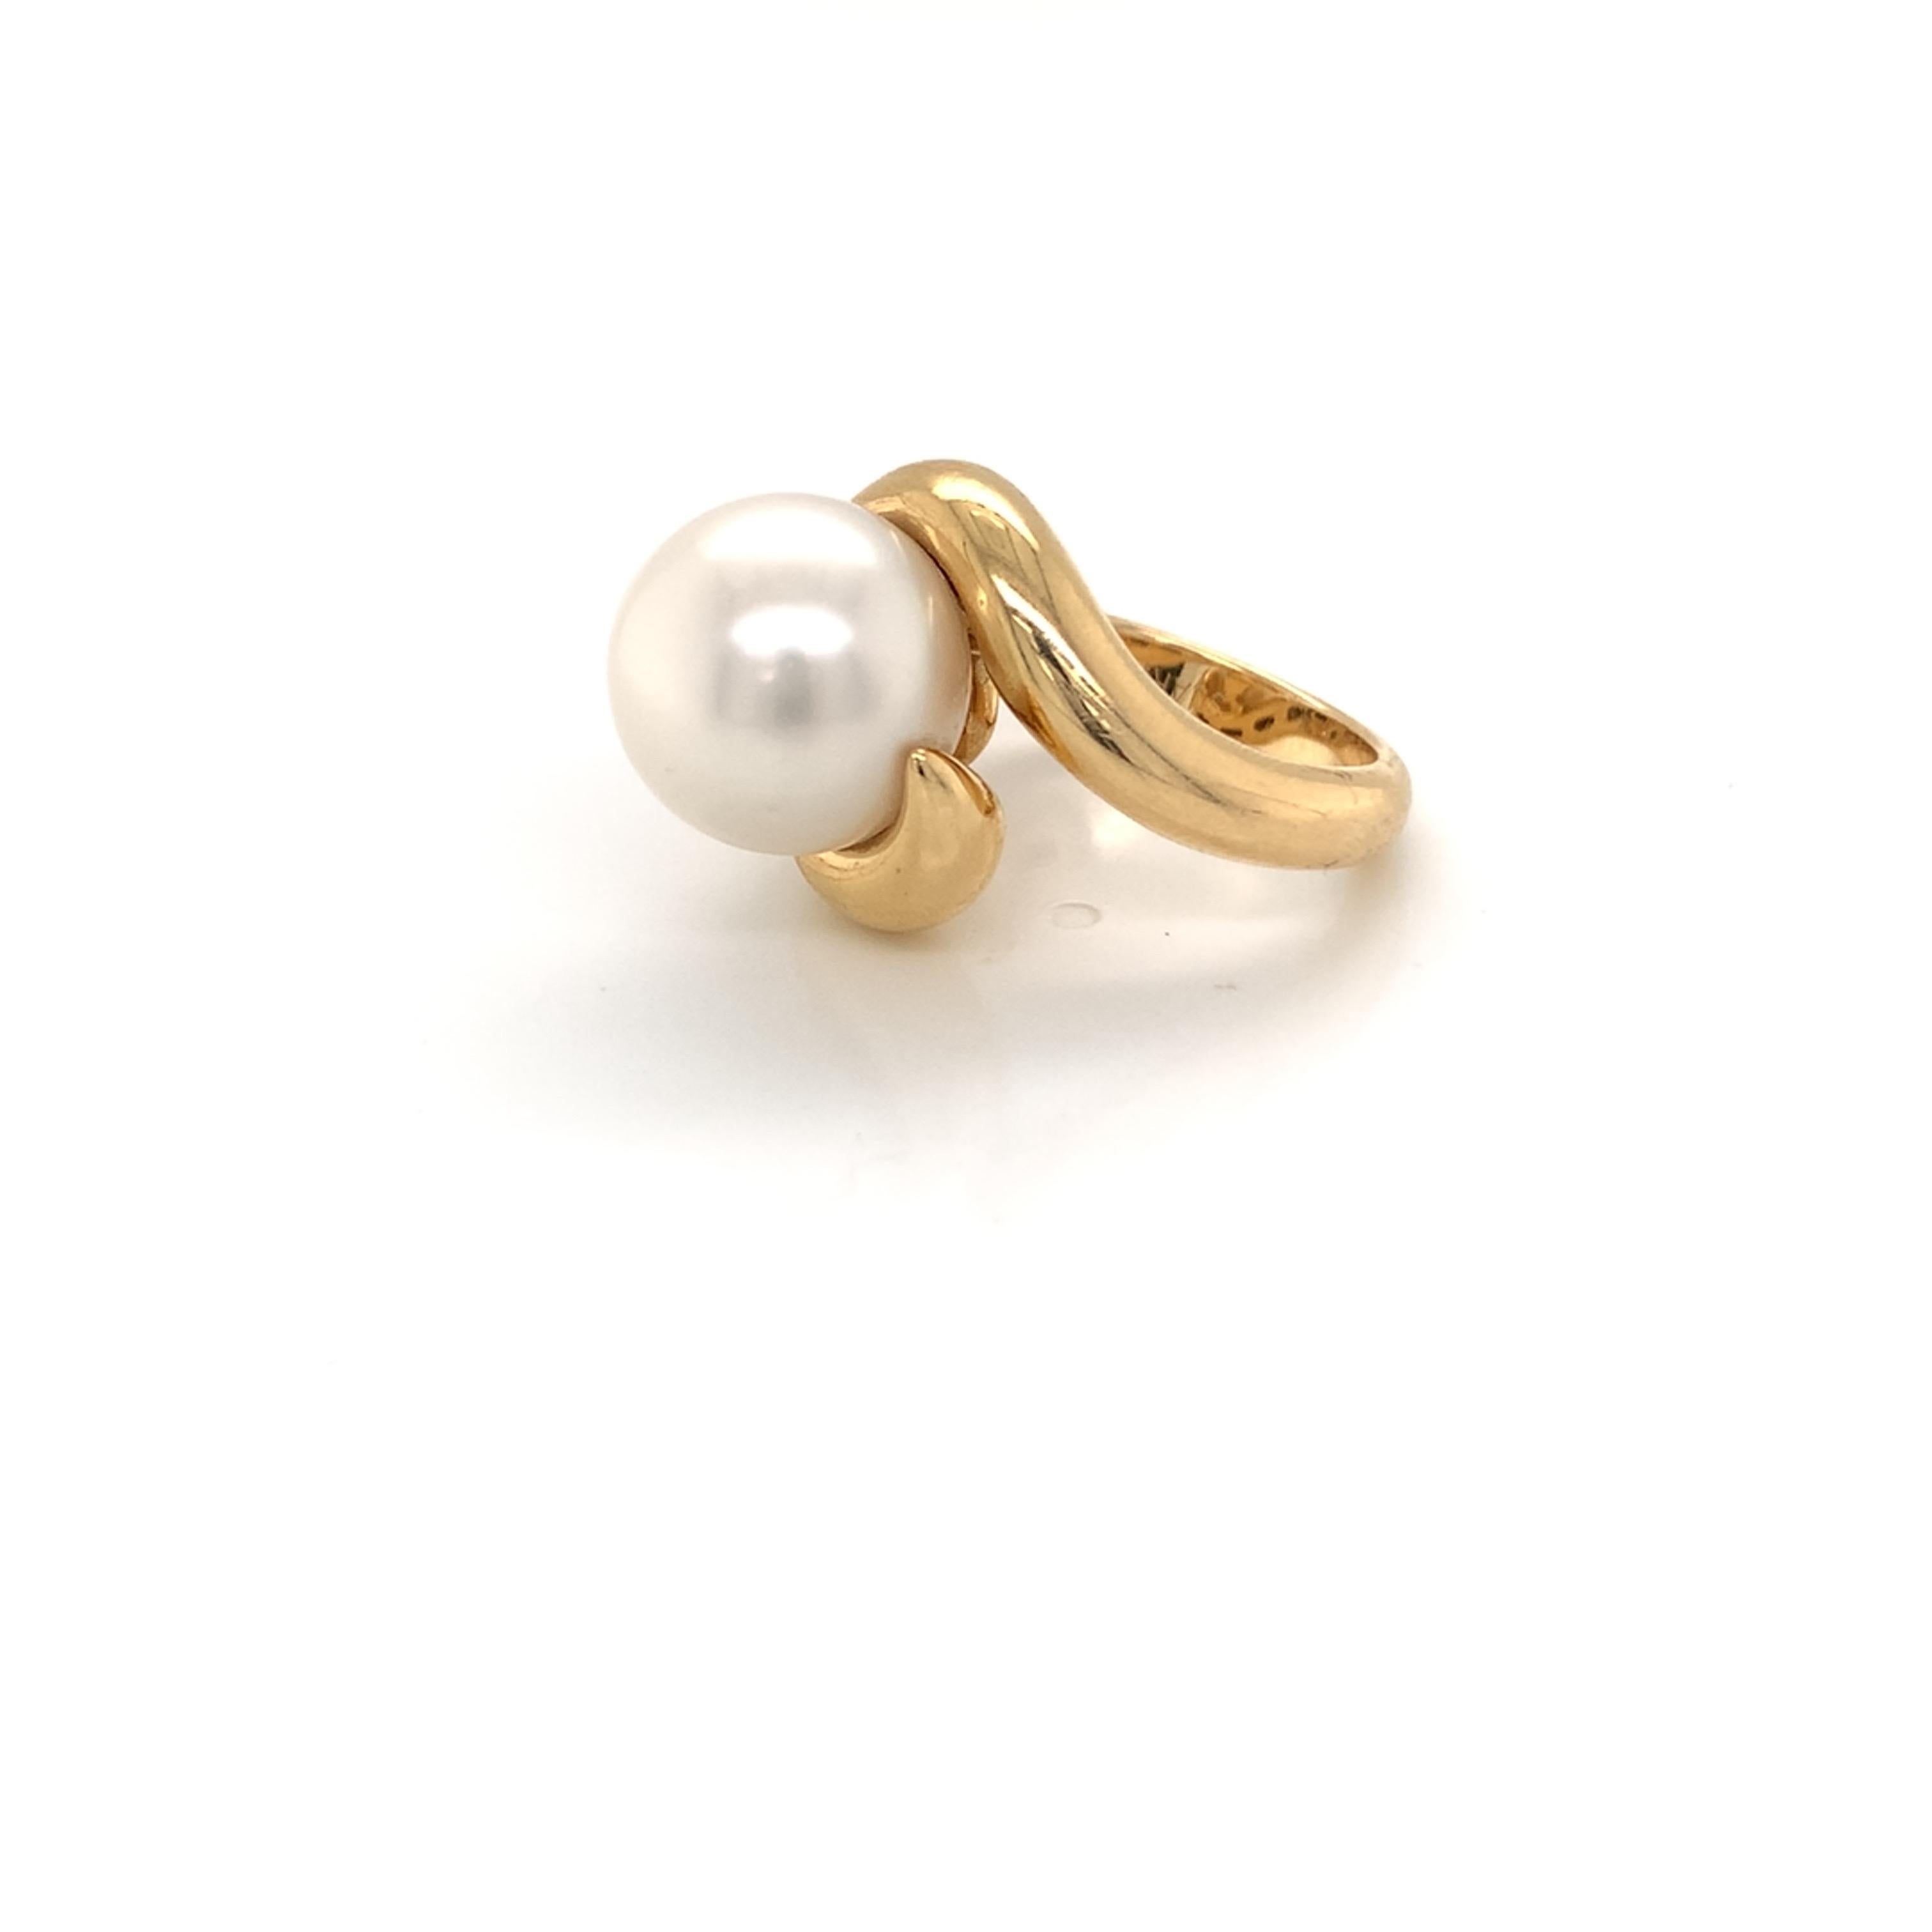 One of a kind natural pearl cocktail ring. Pearl Origin: South Sea Pearl. Color: White, with beautiful luster. Size: 13mm. Mounted on 18kt yellow gold ring size 6.5.